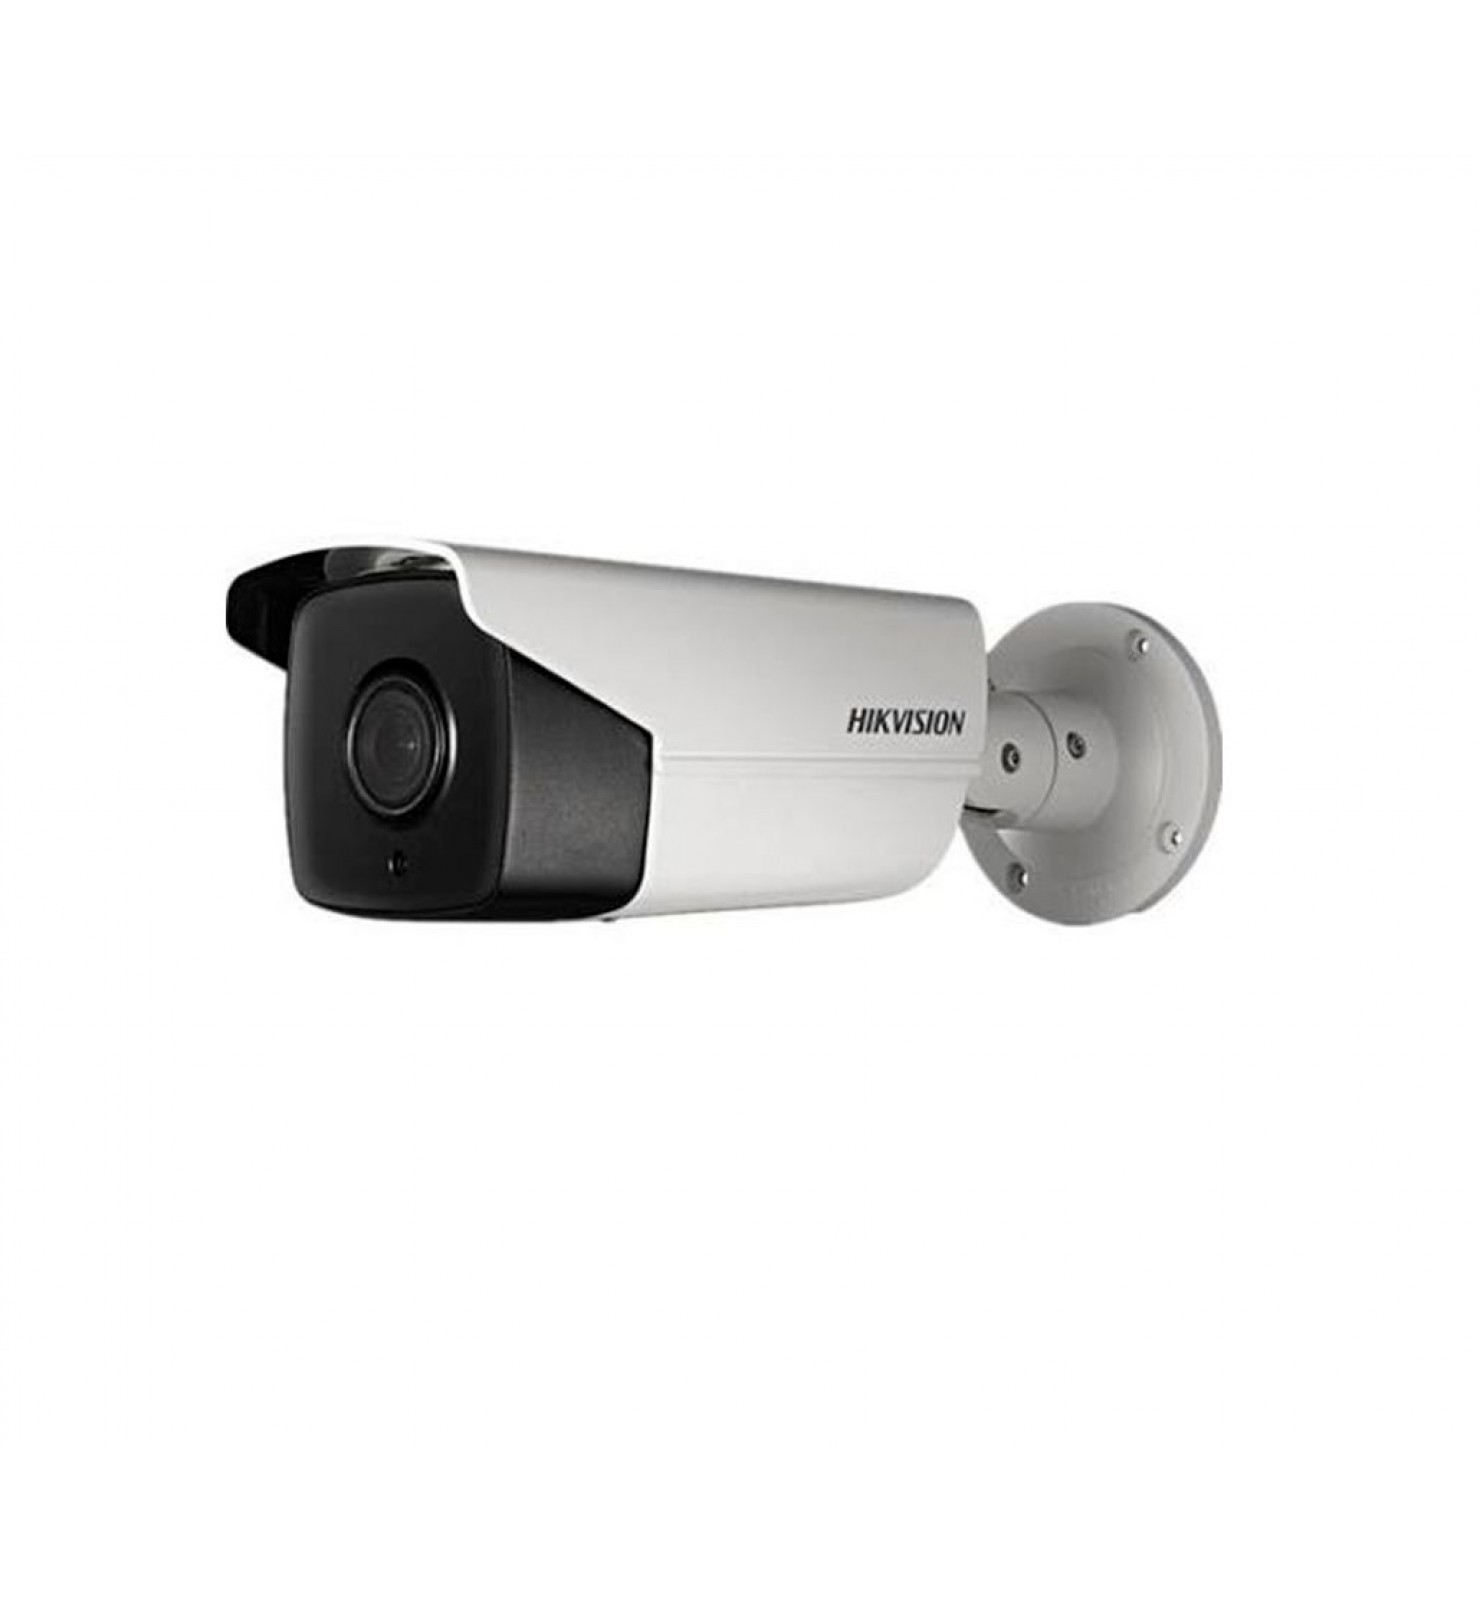 Камера Hikvision DS-2CD2T22WD-I5